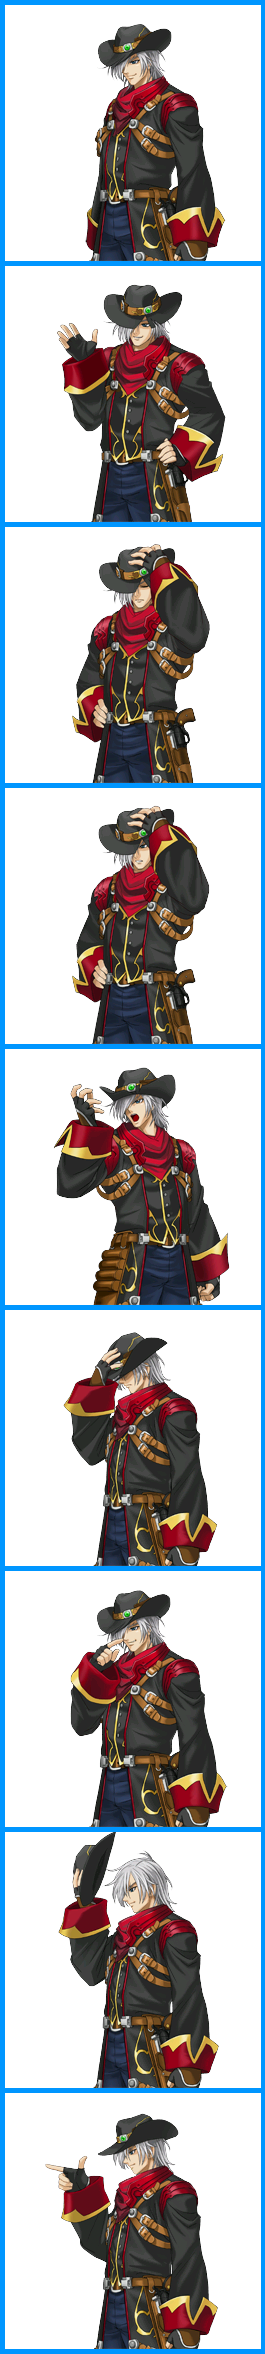 Project X Zone - Haken Browning